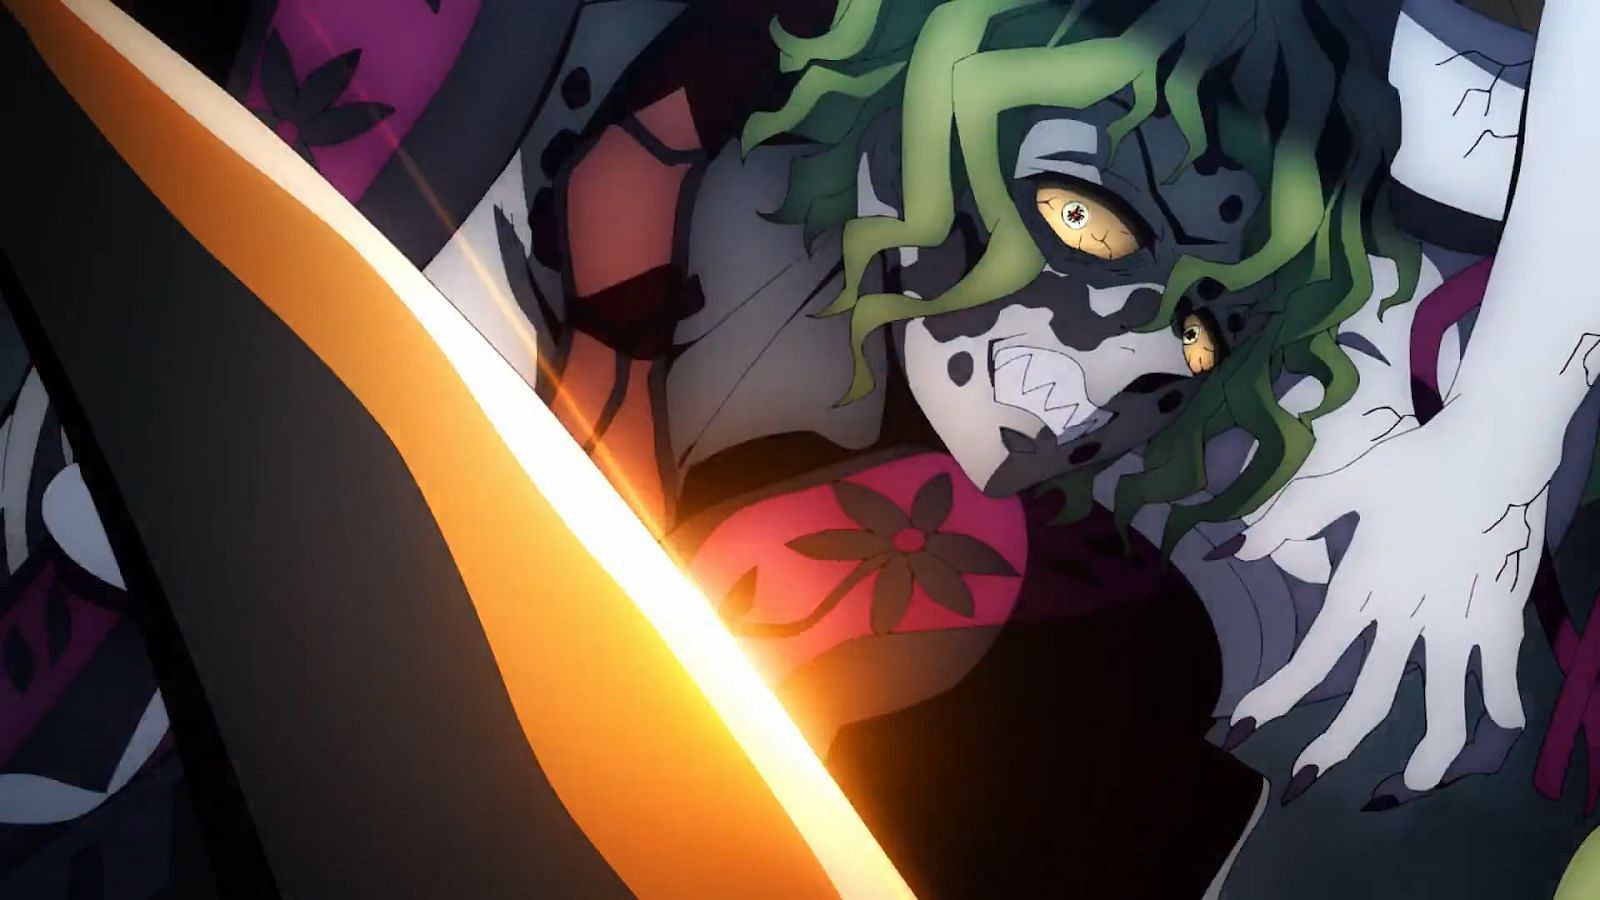 Gyutaro steps into battle and faces off against Uzui in Demon Slayer season 2 episode 15